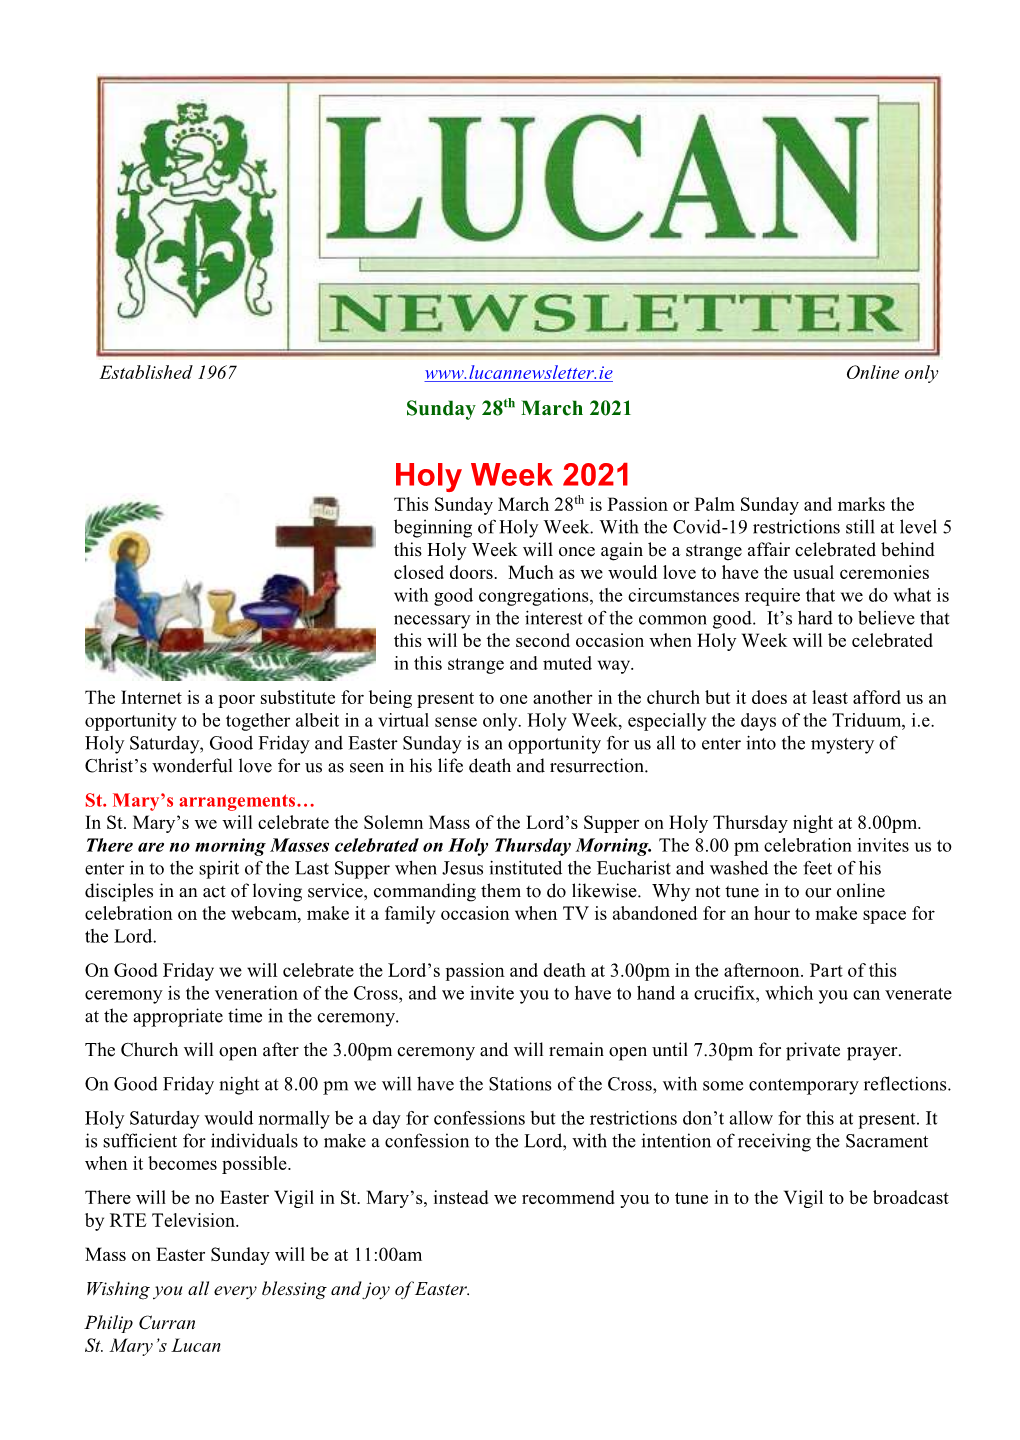 Holy Week 2021 This Sunday March 28Th Is Passion Or Palm Sunday and Marks the Beginning of Holy Week